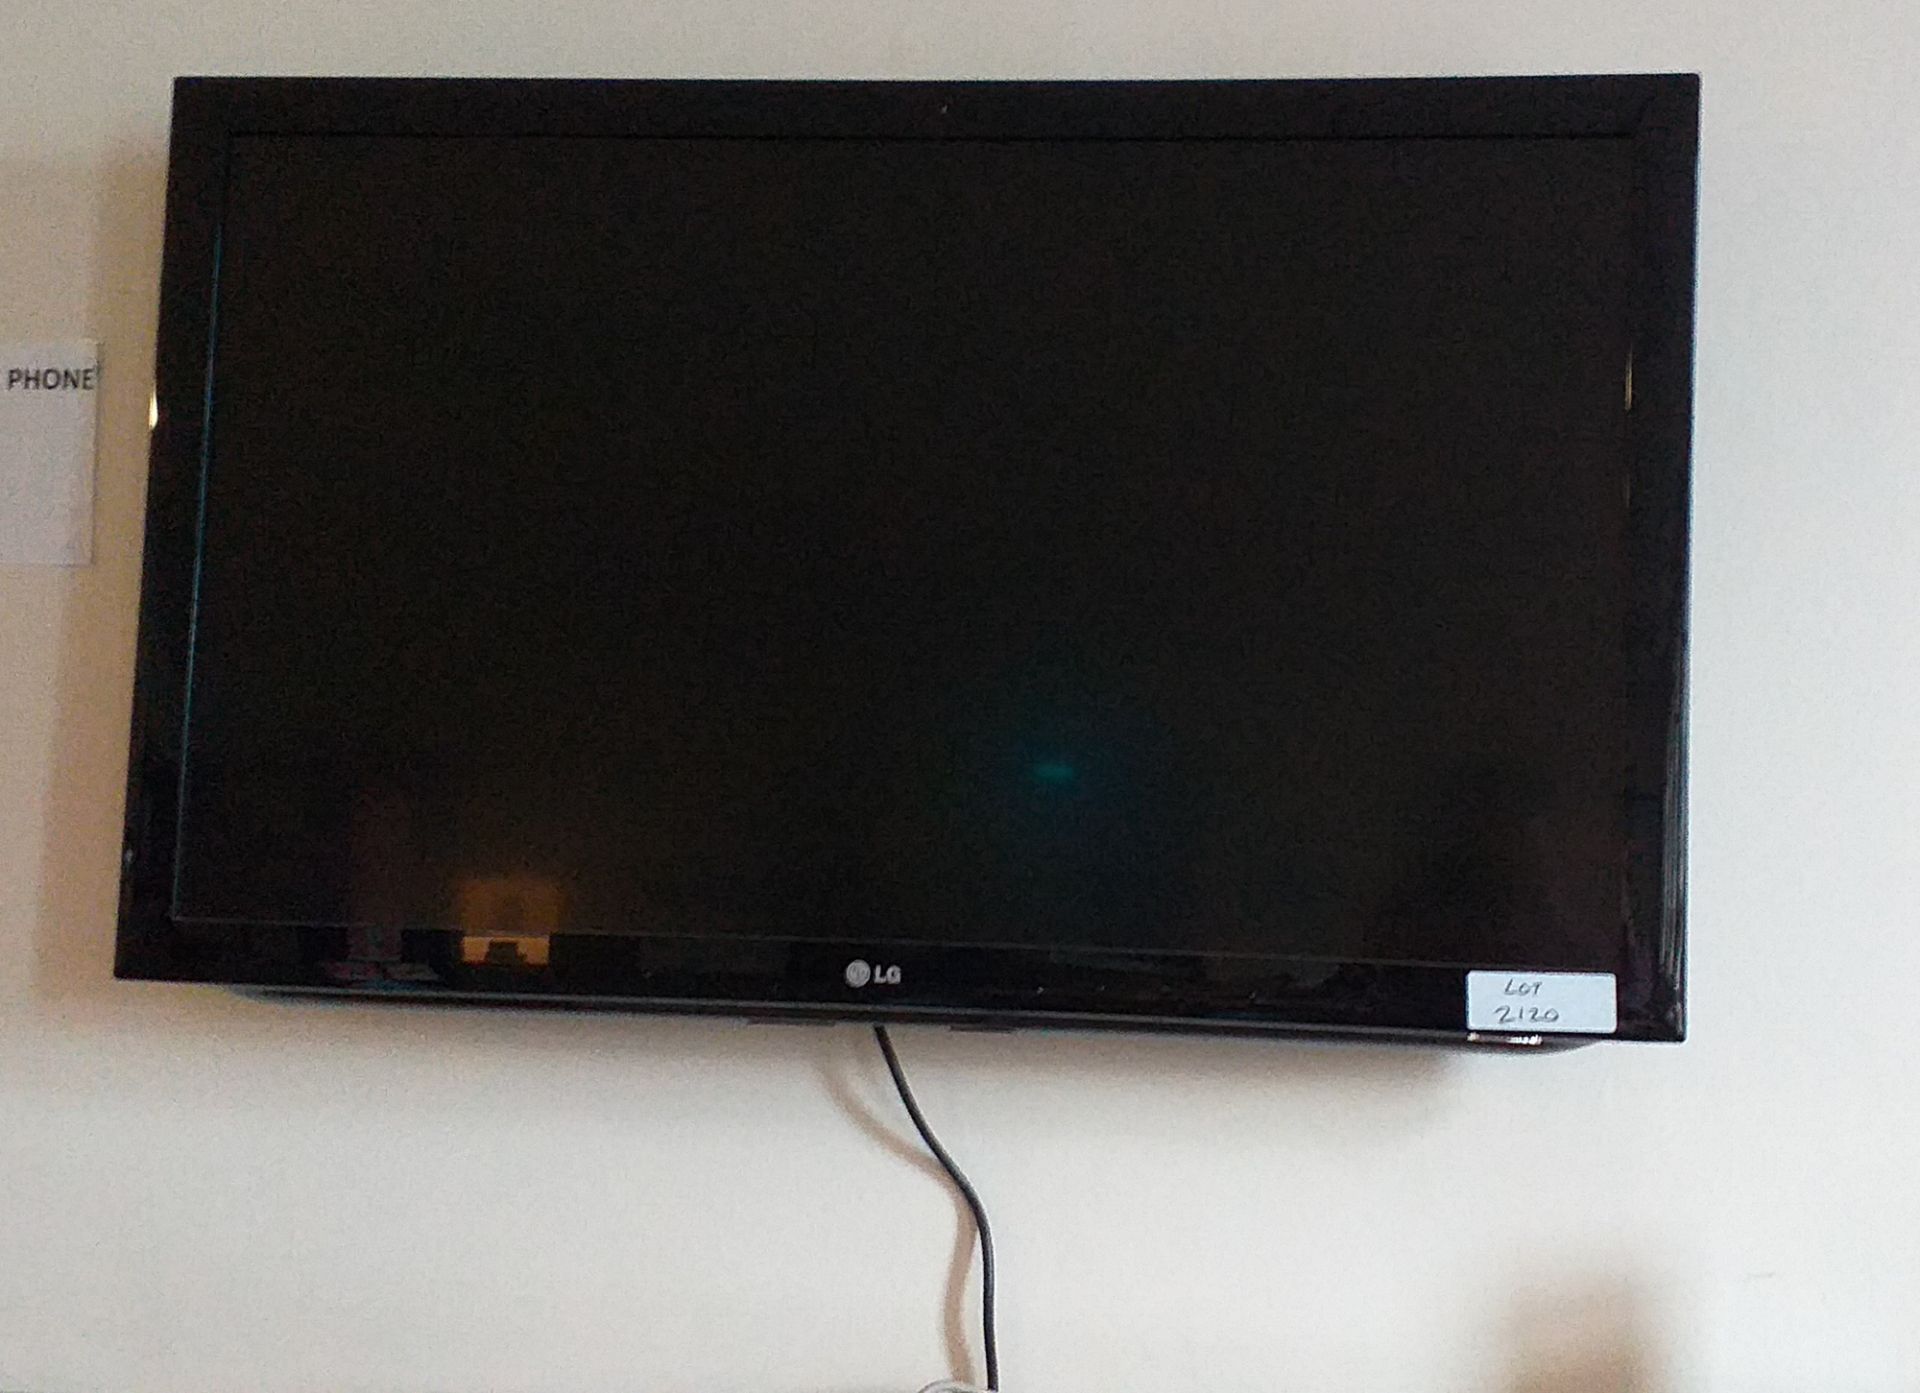 LG TV [RIGGING FEES FOR LOT #2120 - £50 PLUS APPLICABLE TAXES]